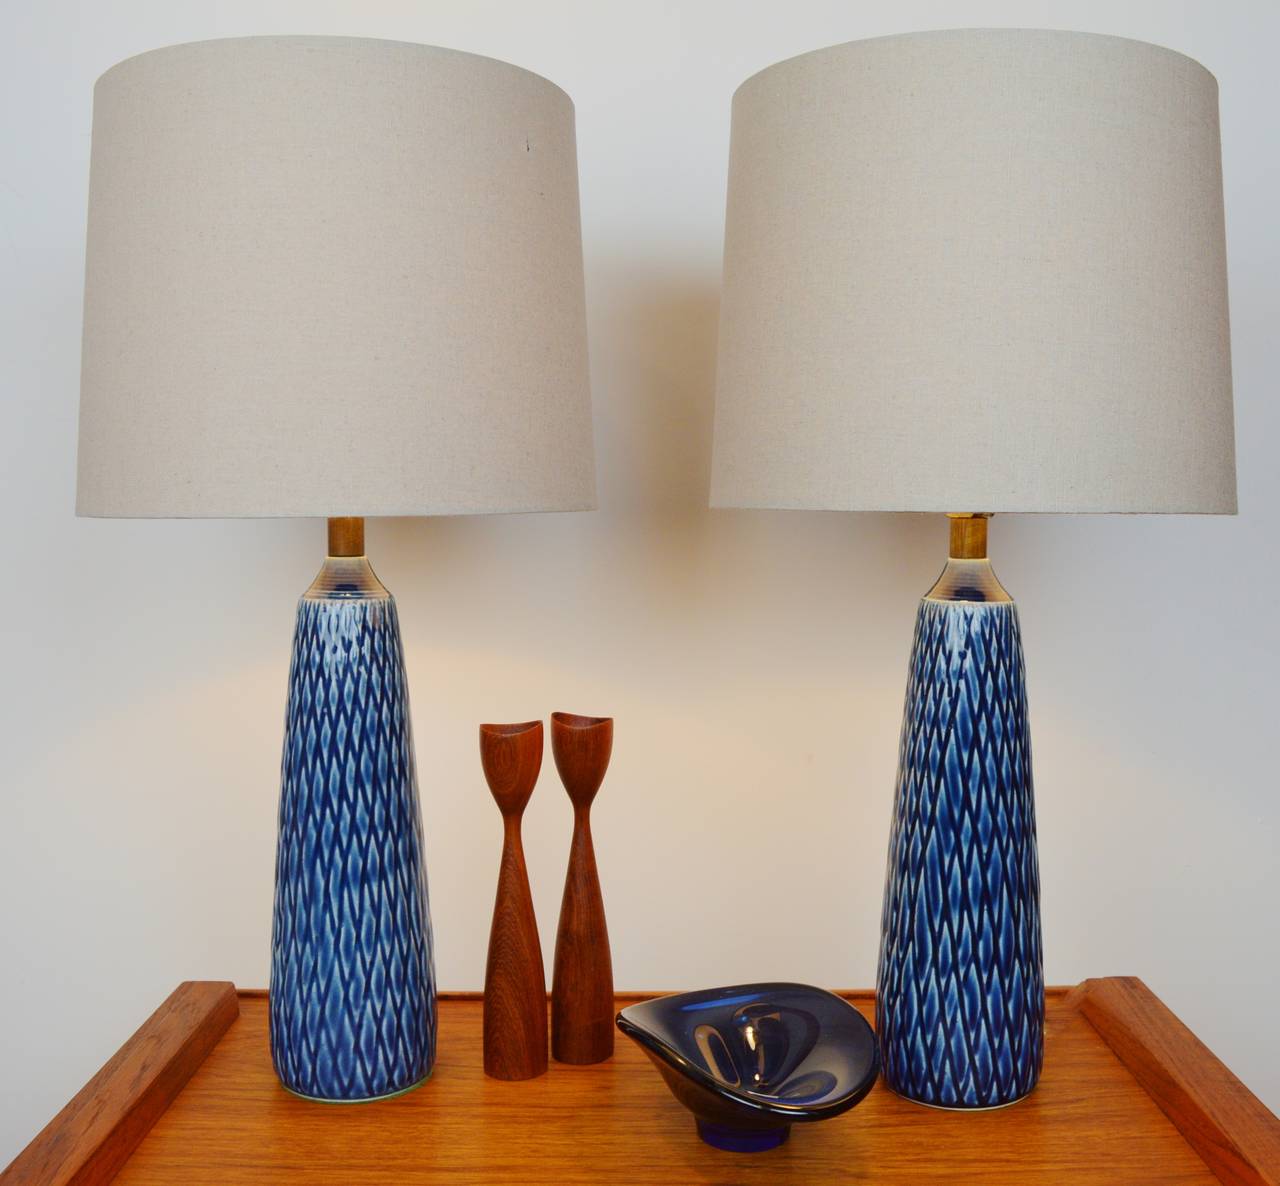 If you're not familiar with the stunning ceramic lamps designed and created by Lotte & Gunnar Bostland, originally of Denmark but who relocated their business to Ontario, Canada in the 60s and 70s, then you are seriously missing out!  This